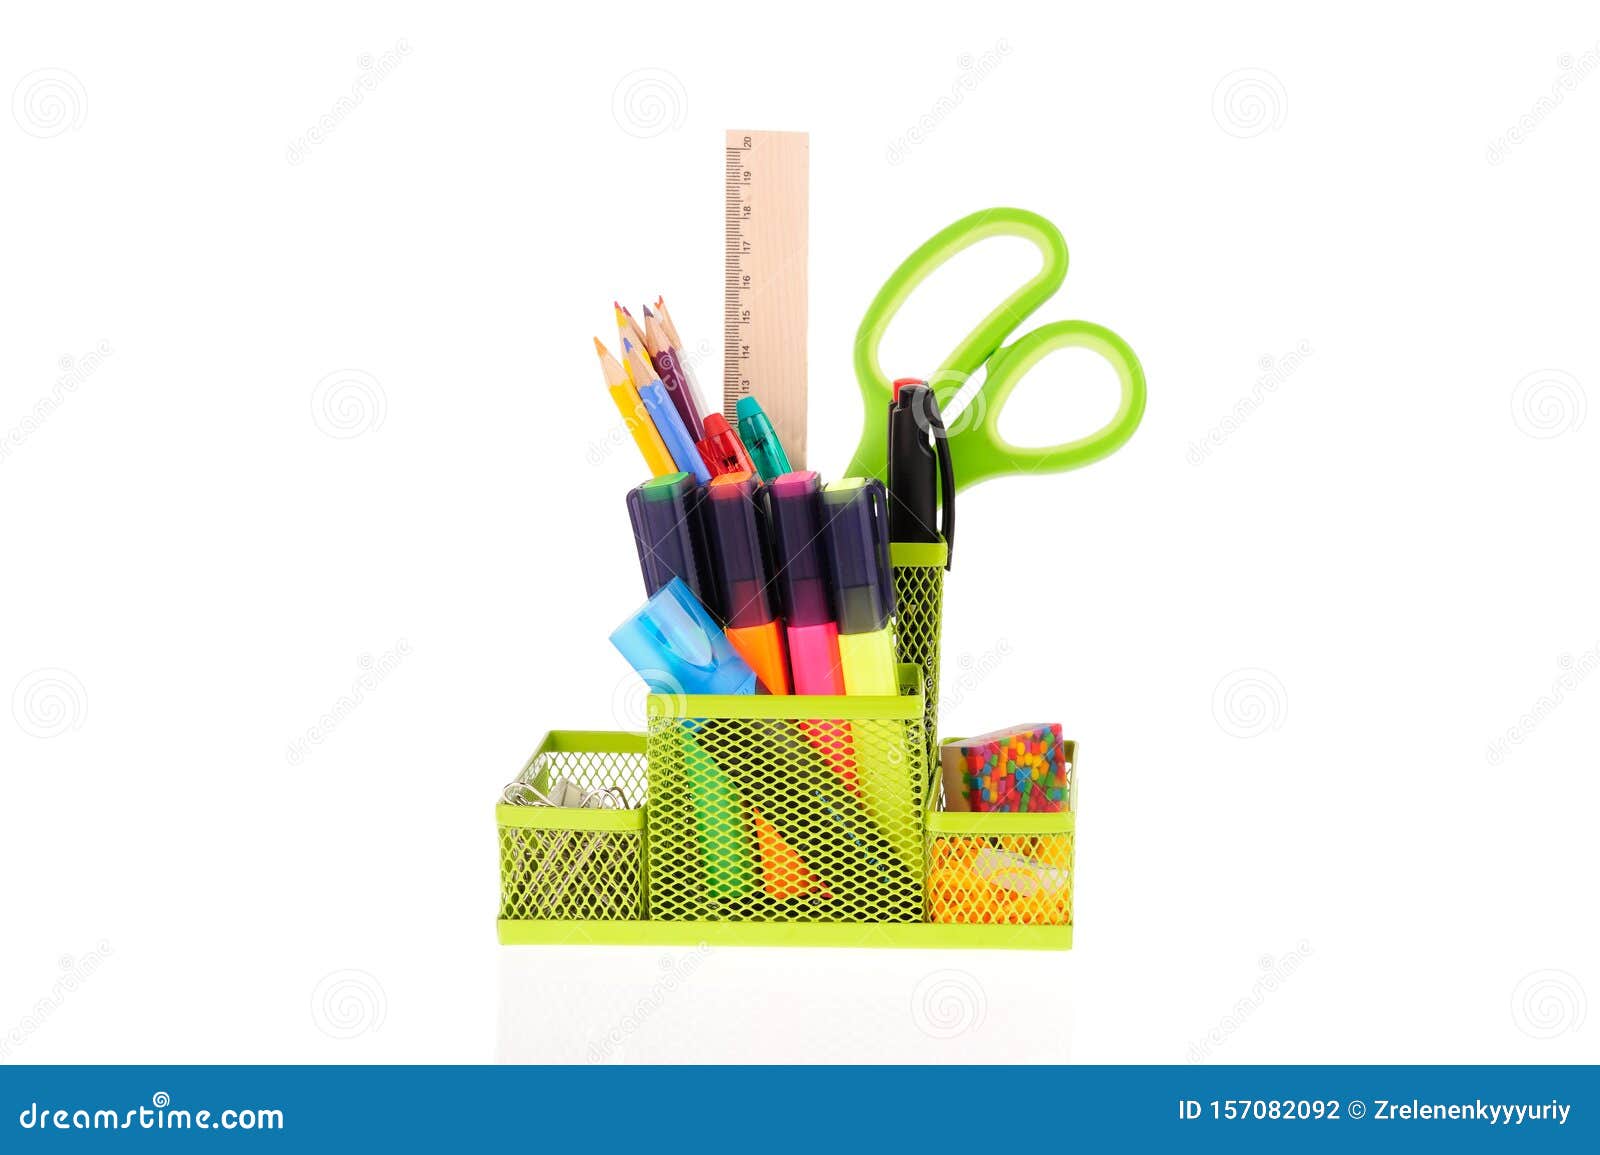 set of office tools  on the white background